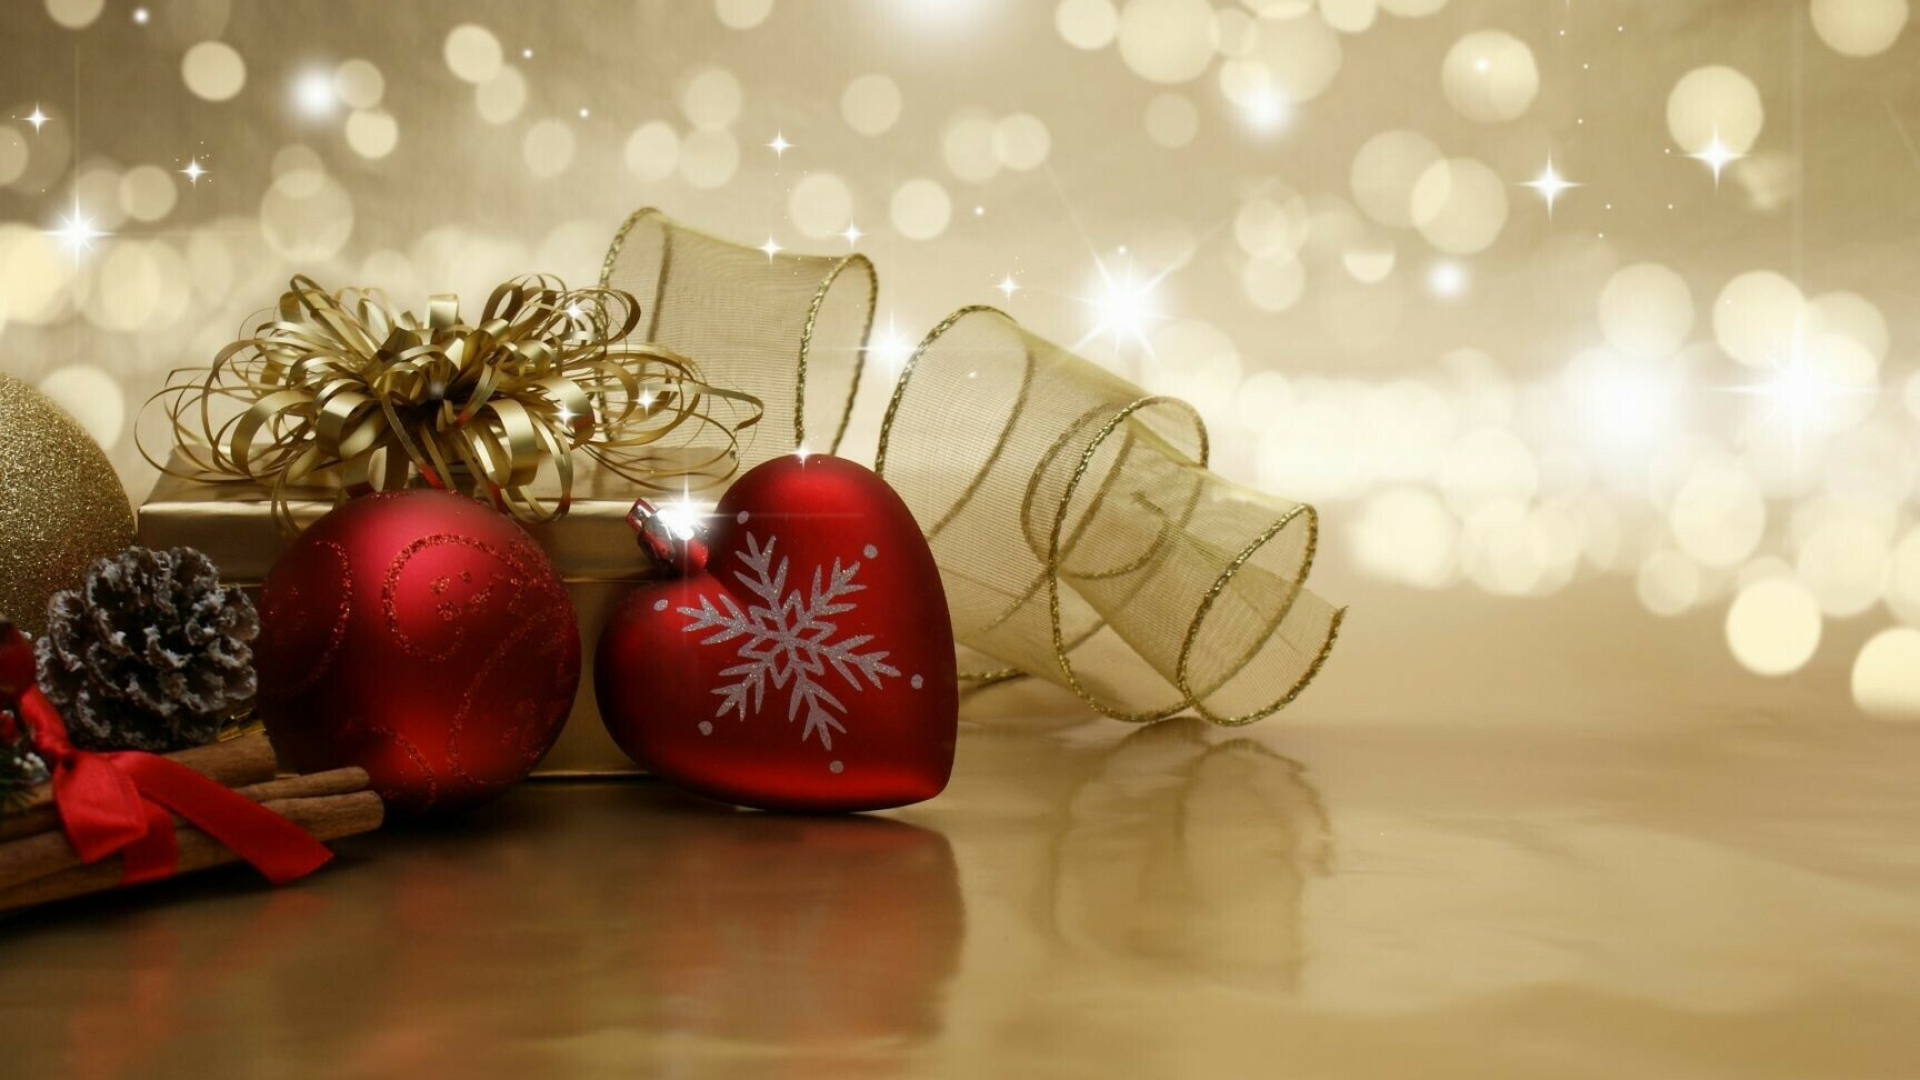 Decorations: Adornment, Ornamentation, Christmas baubles. 1920x1080 Full HD Background.